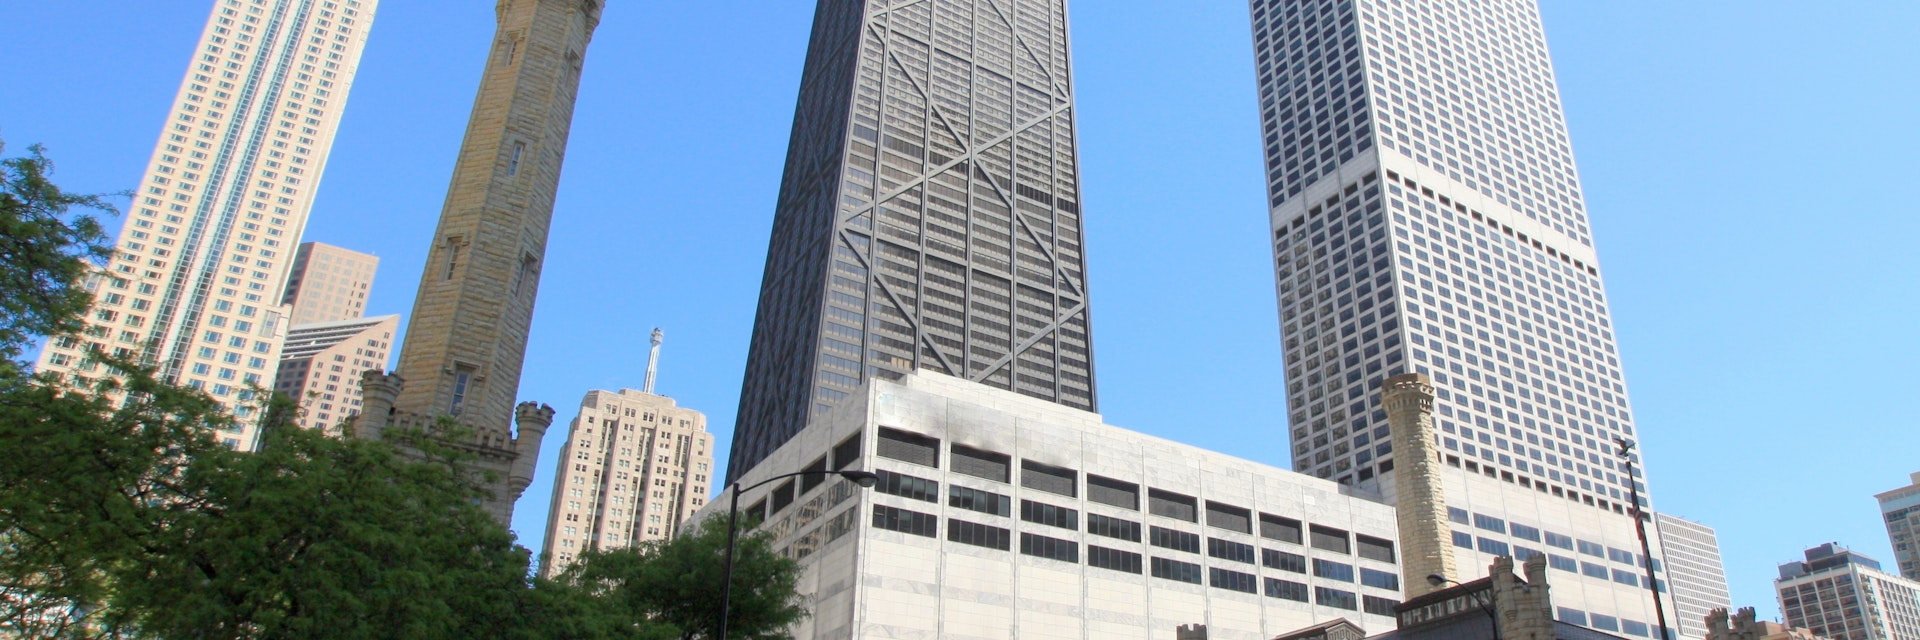 Hancock Building and Water Tower